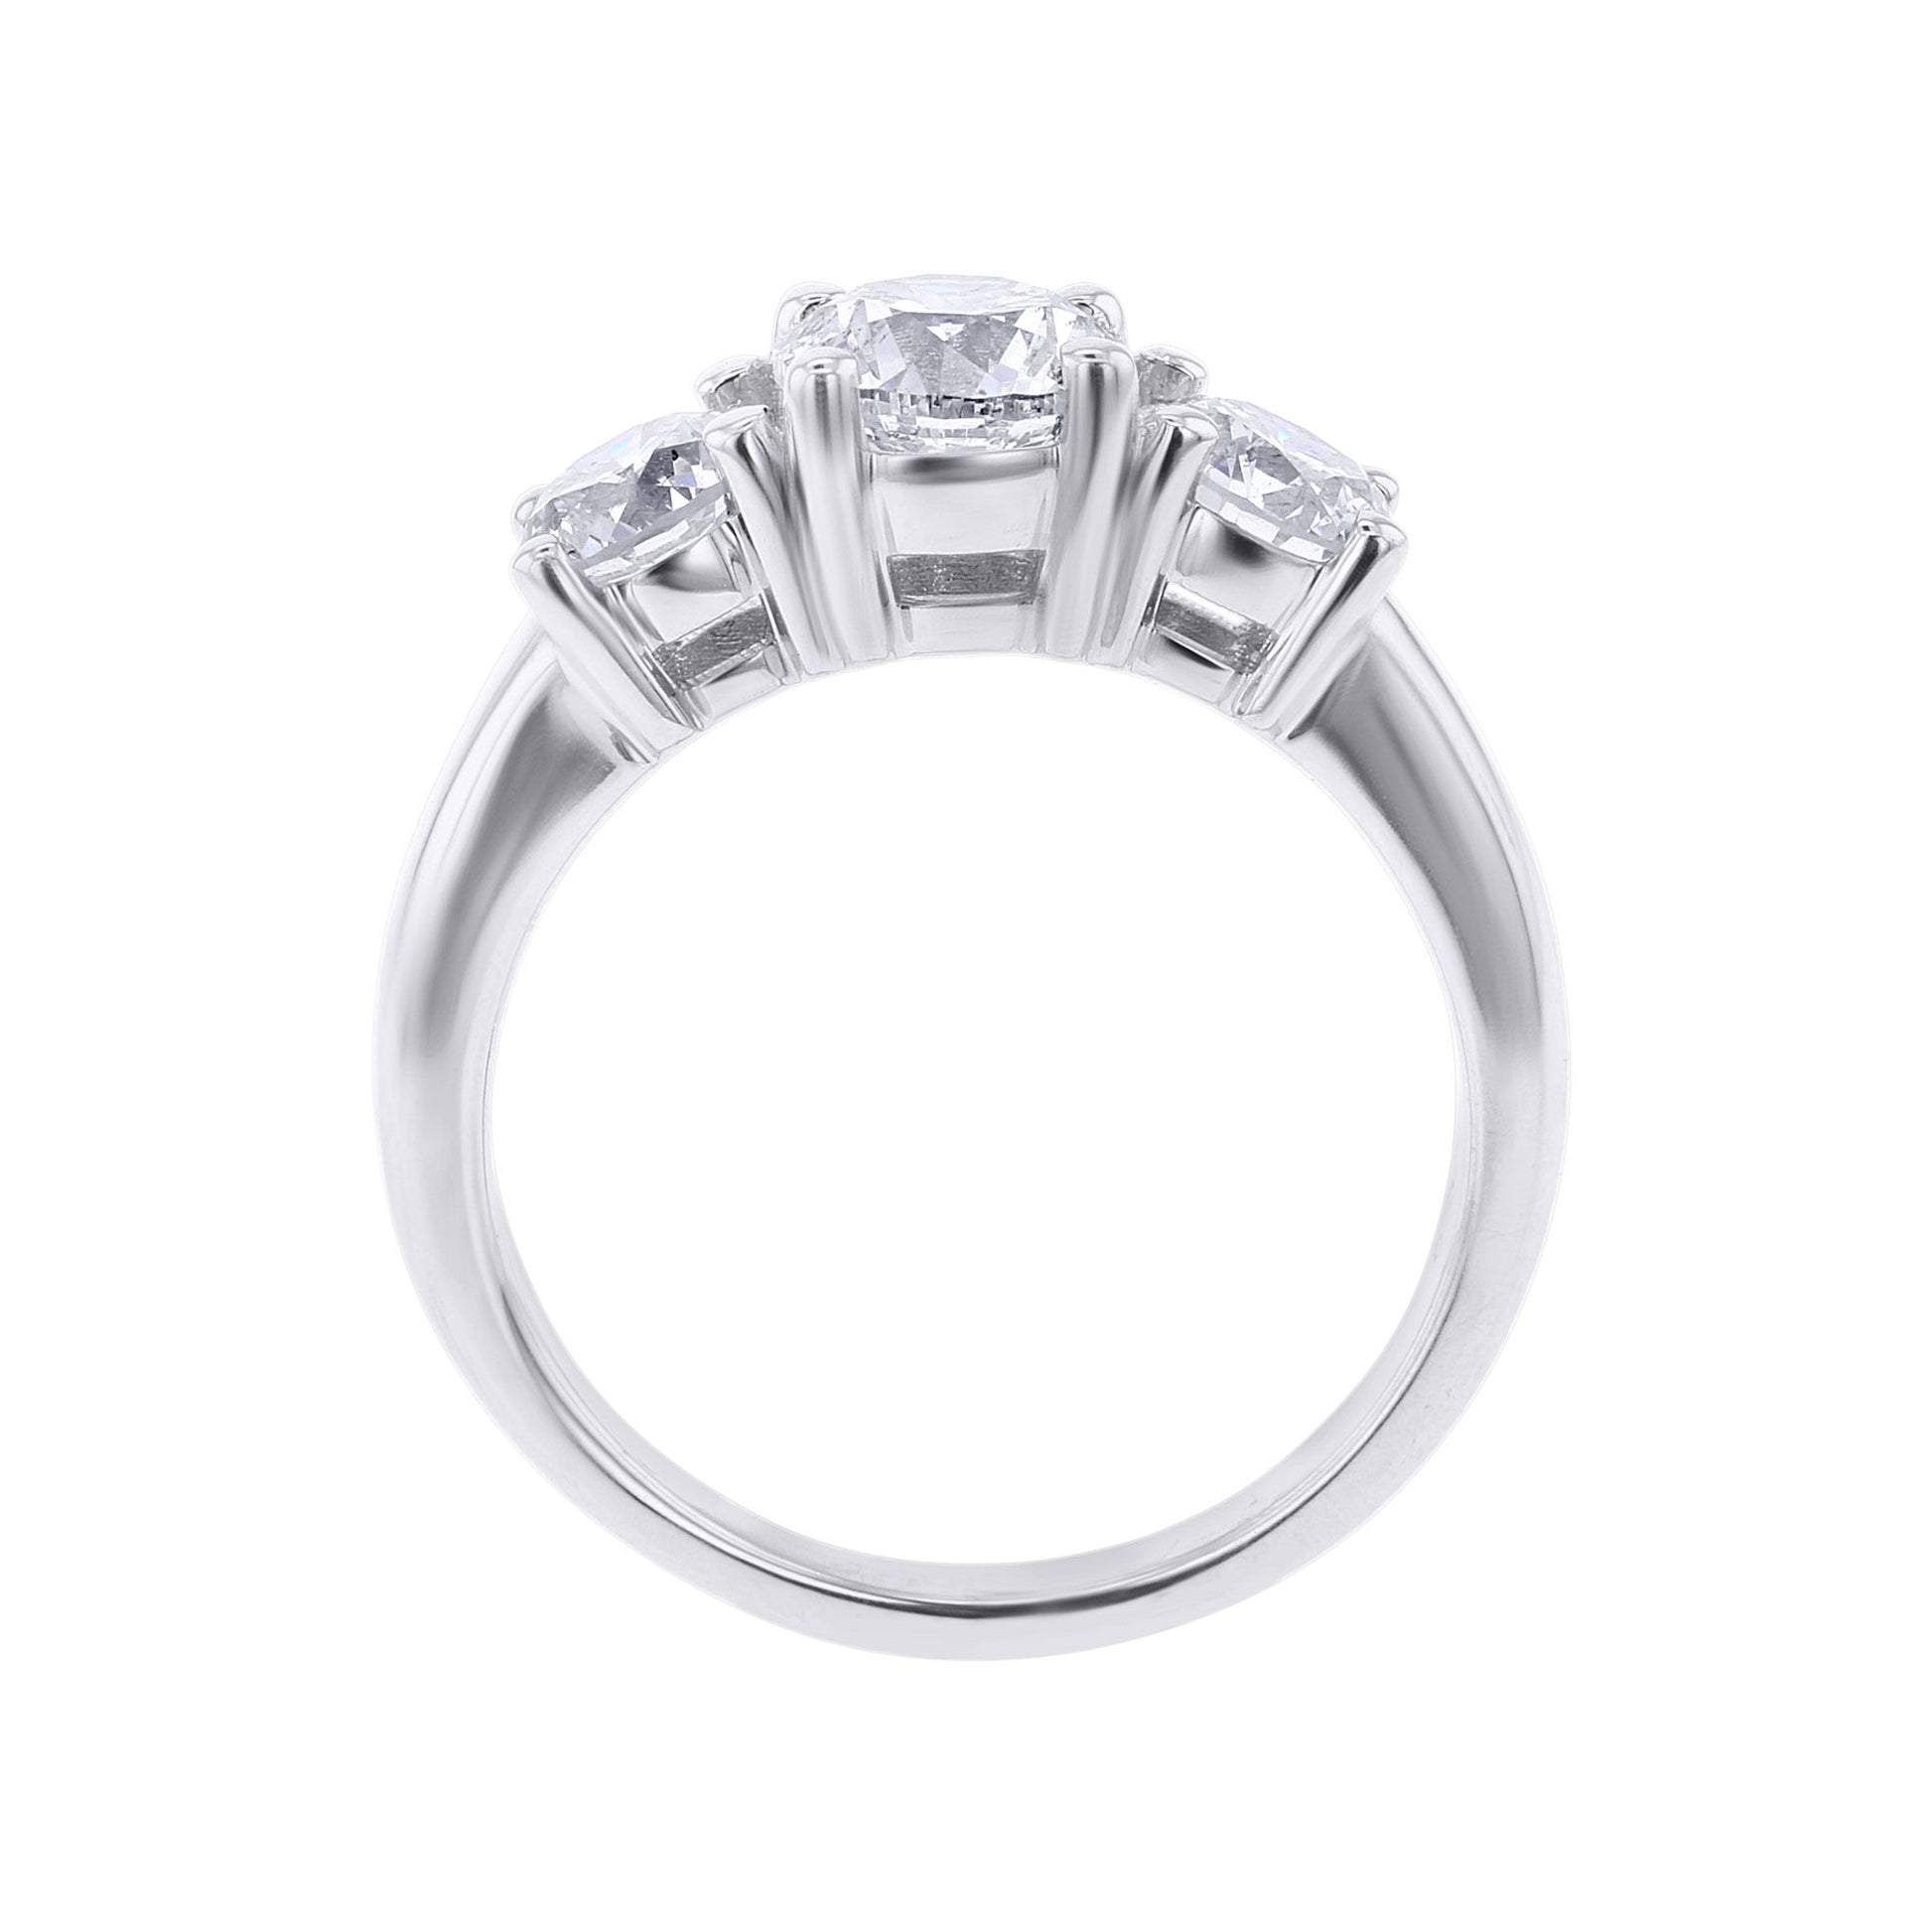 Classic Three Stone Ready for Love Diamond Engagement Ring 2Ct